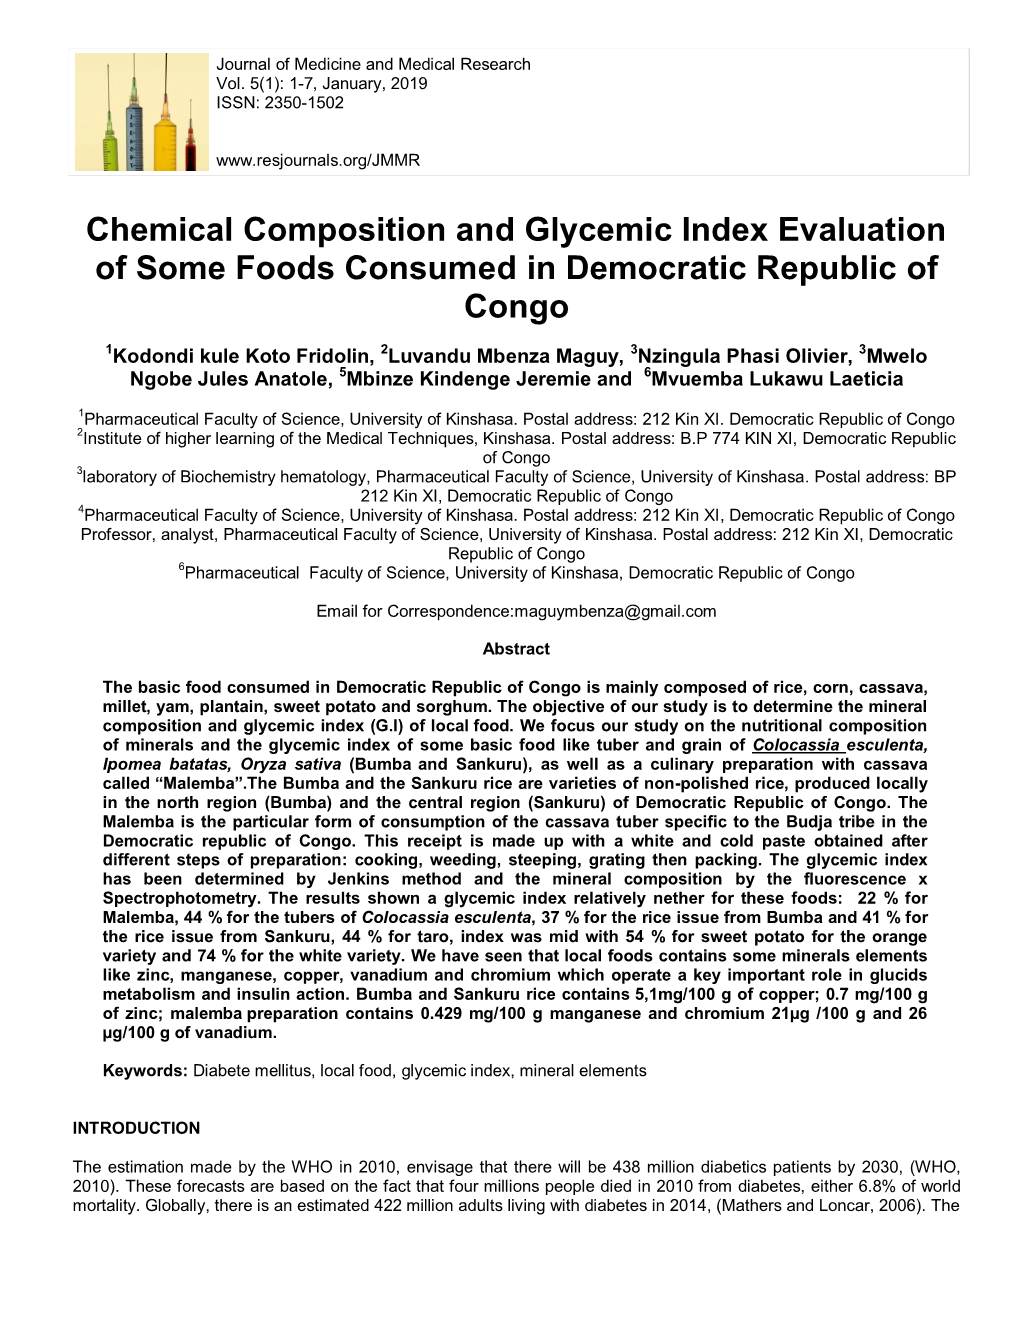 Chemical Composition and Glycemic Index Evaluation of Some Foods Consumed in Democratic Republic of Congo